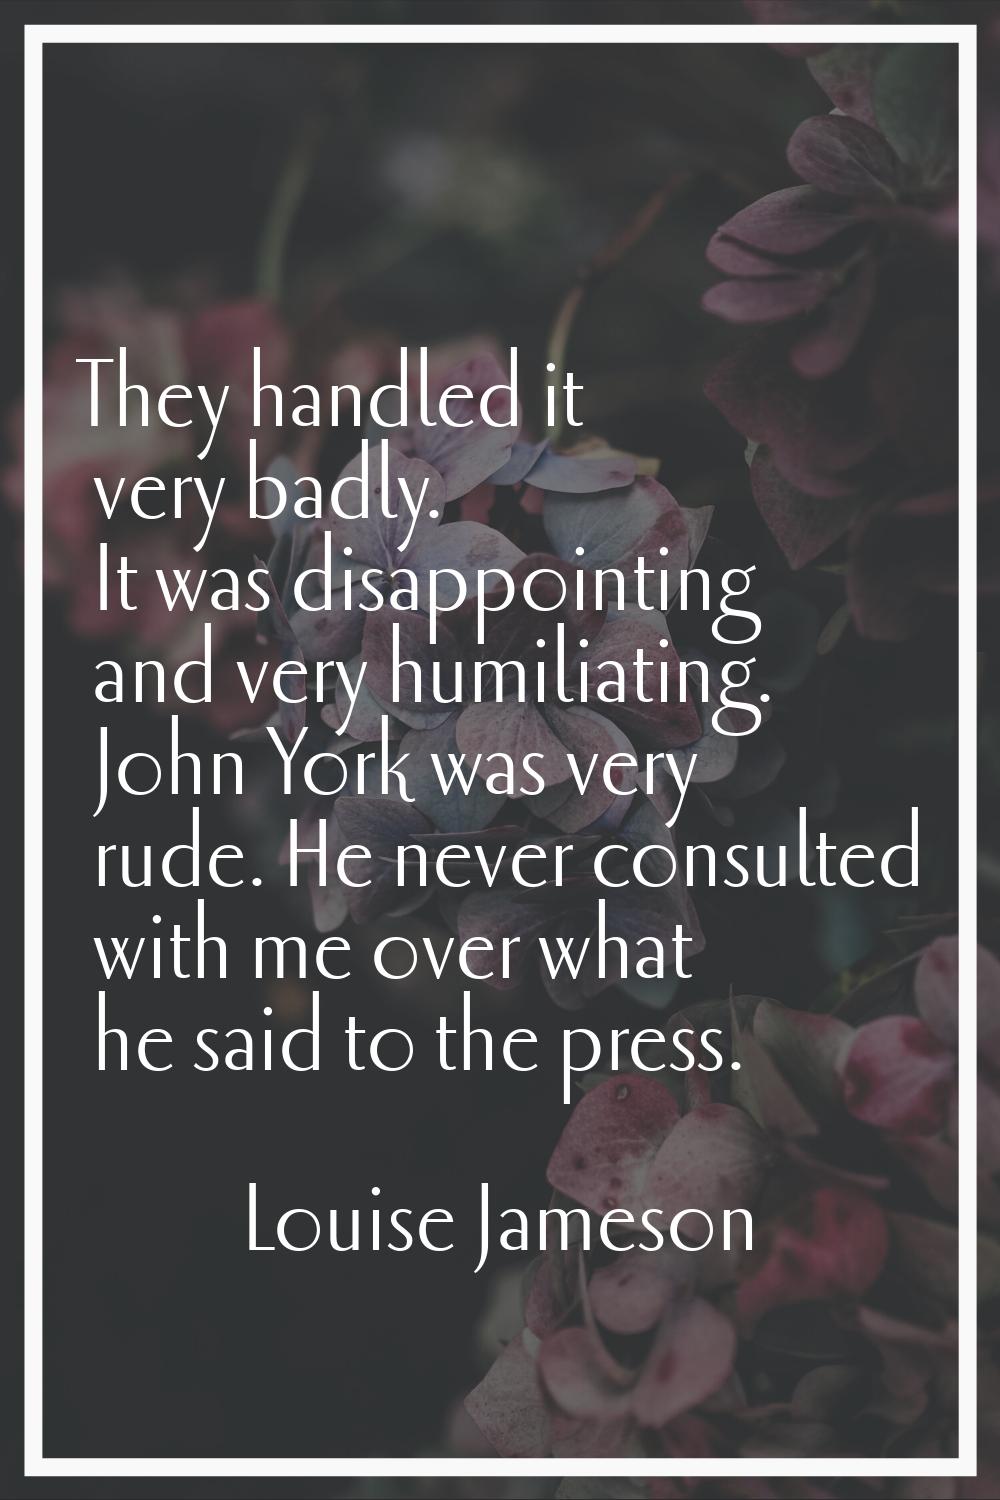 They handled it very badly. It was disappointing and very humiliating. John York was very rude. He 